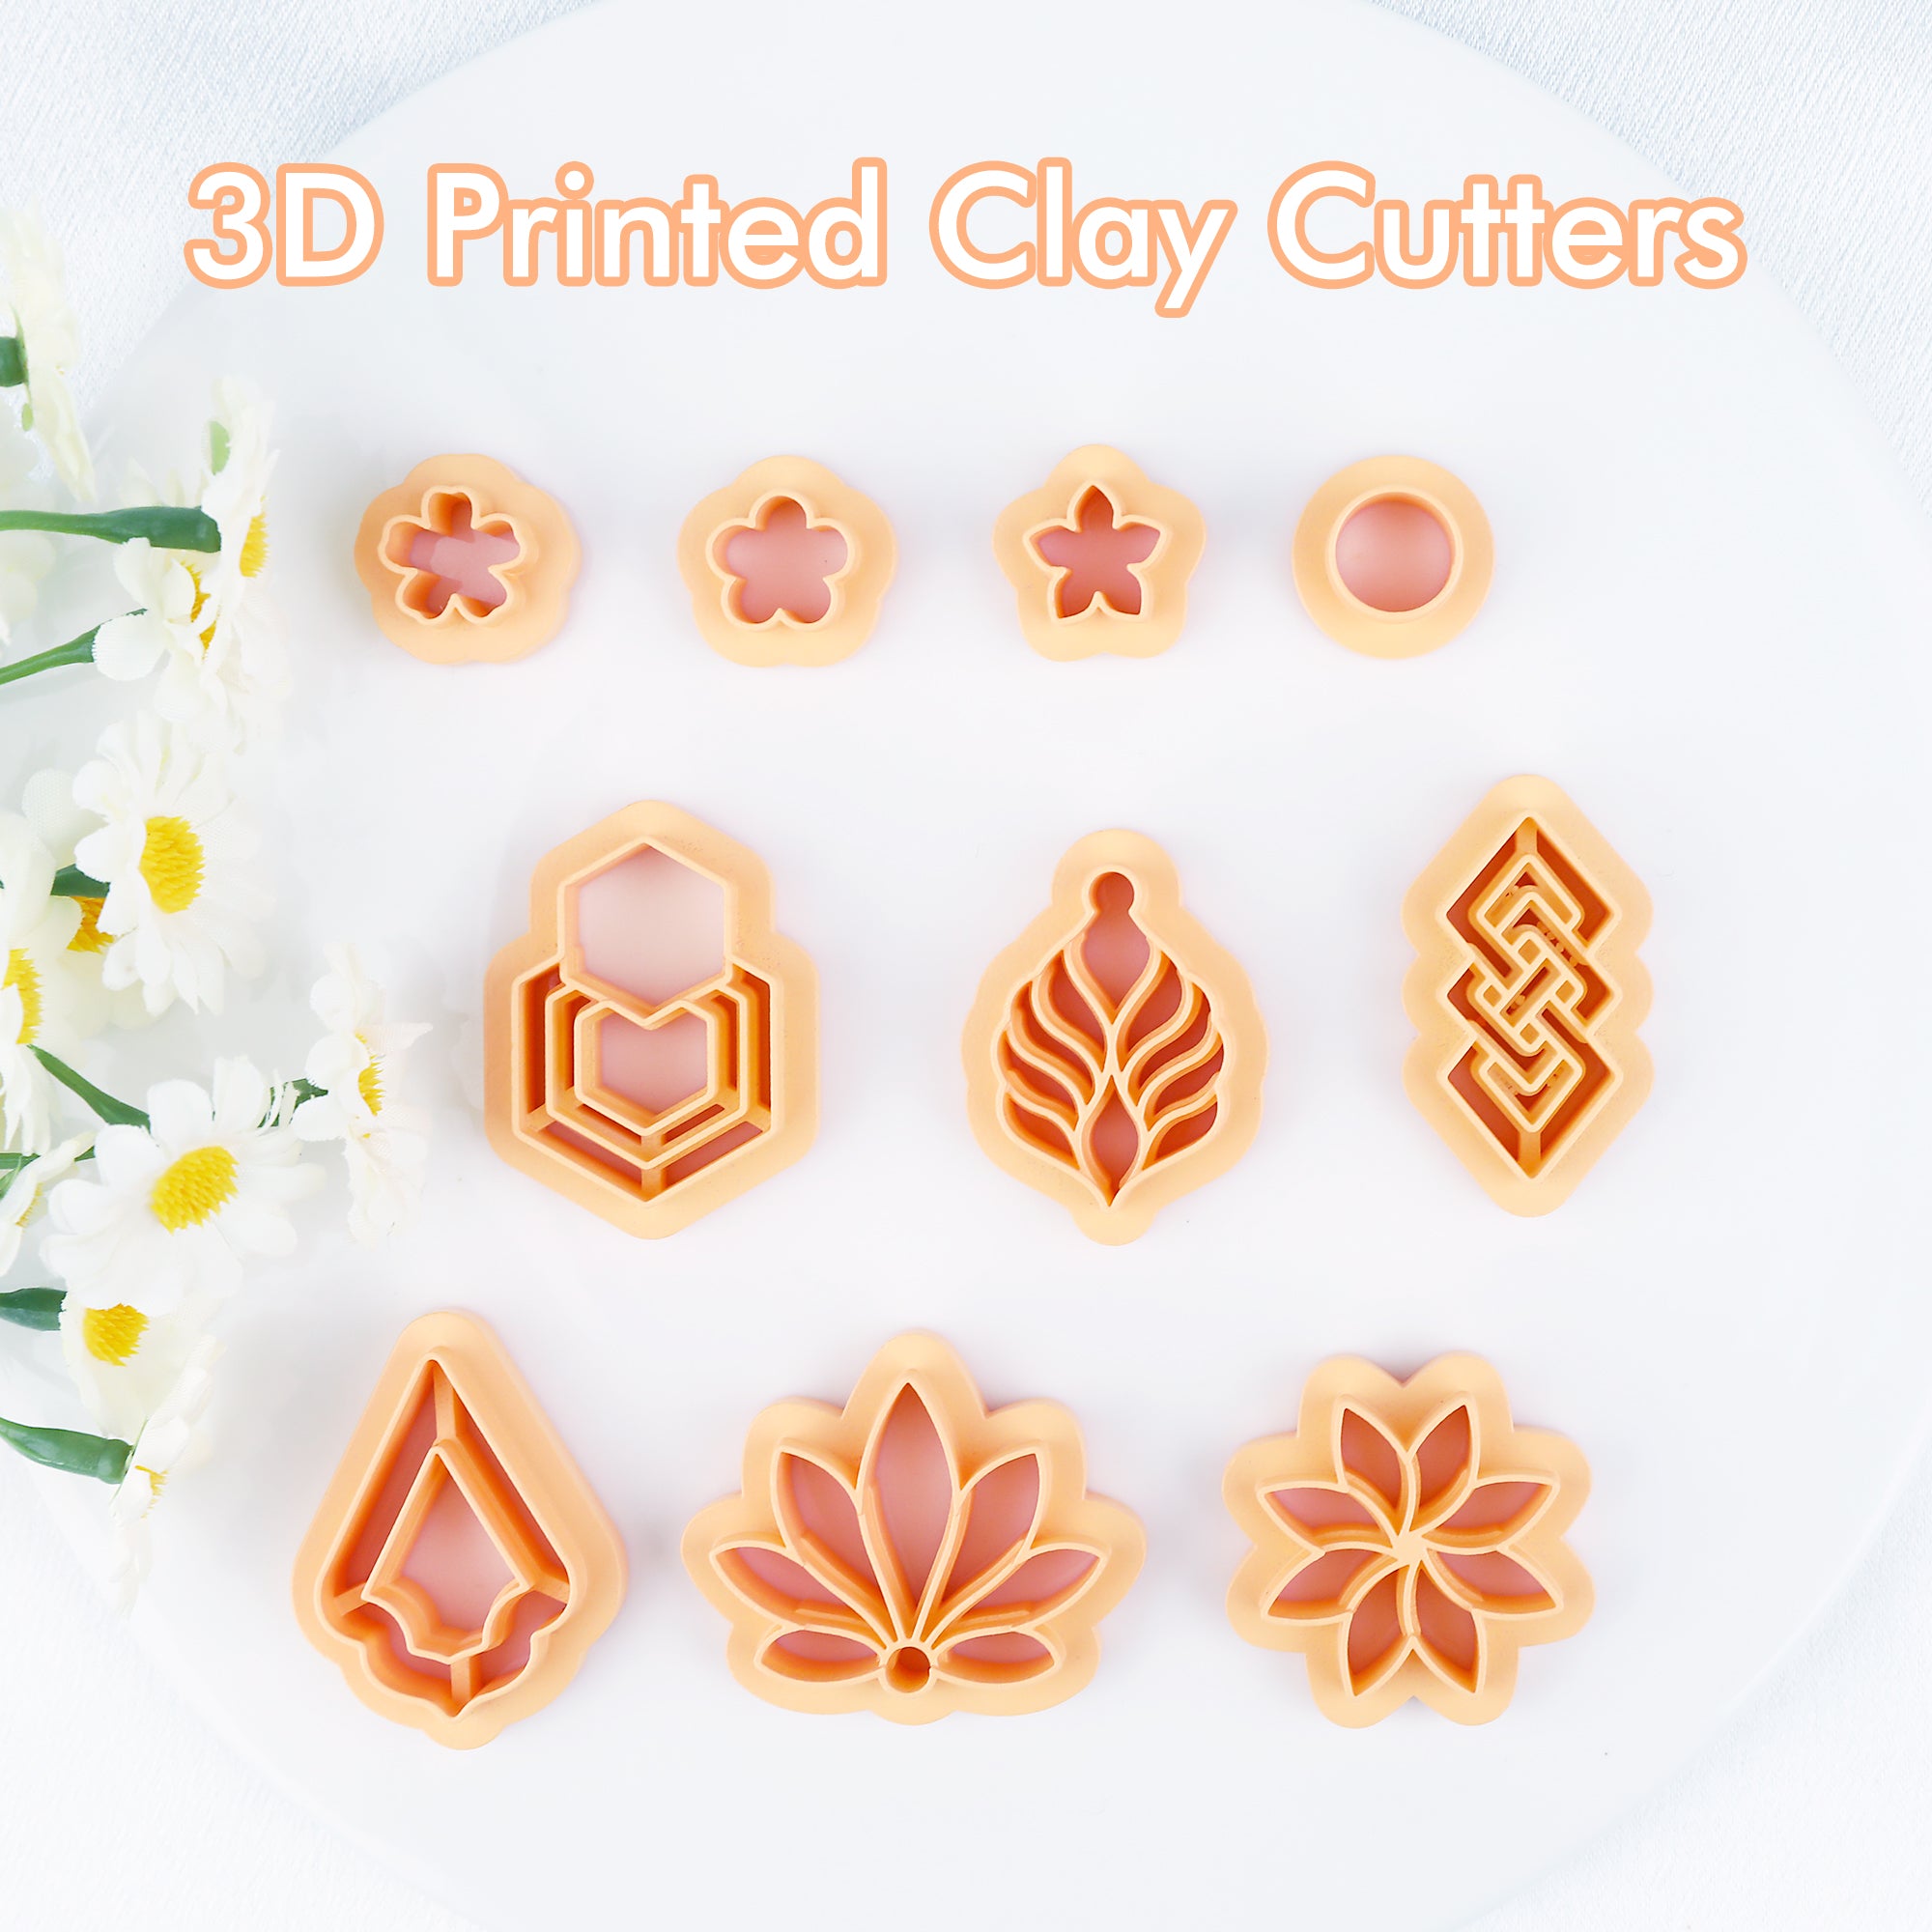 Puocaon Classic Polymer Clay Cutters 10 Pcs